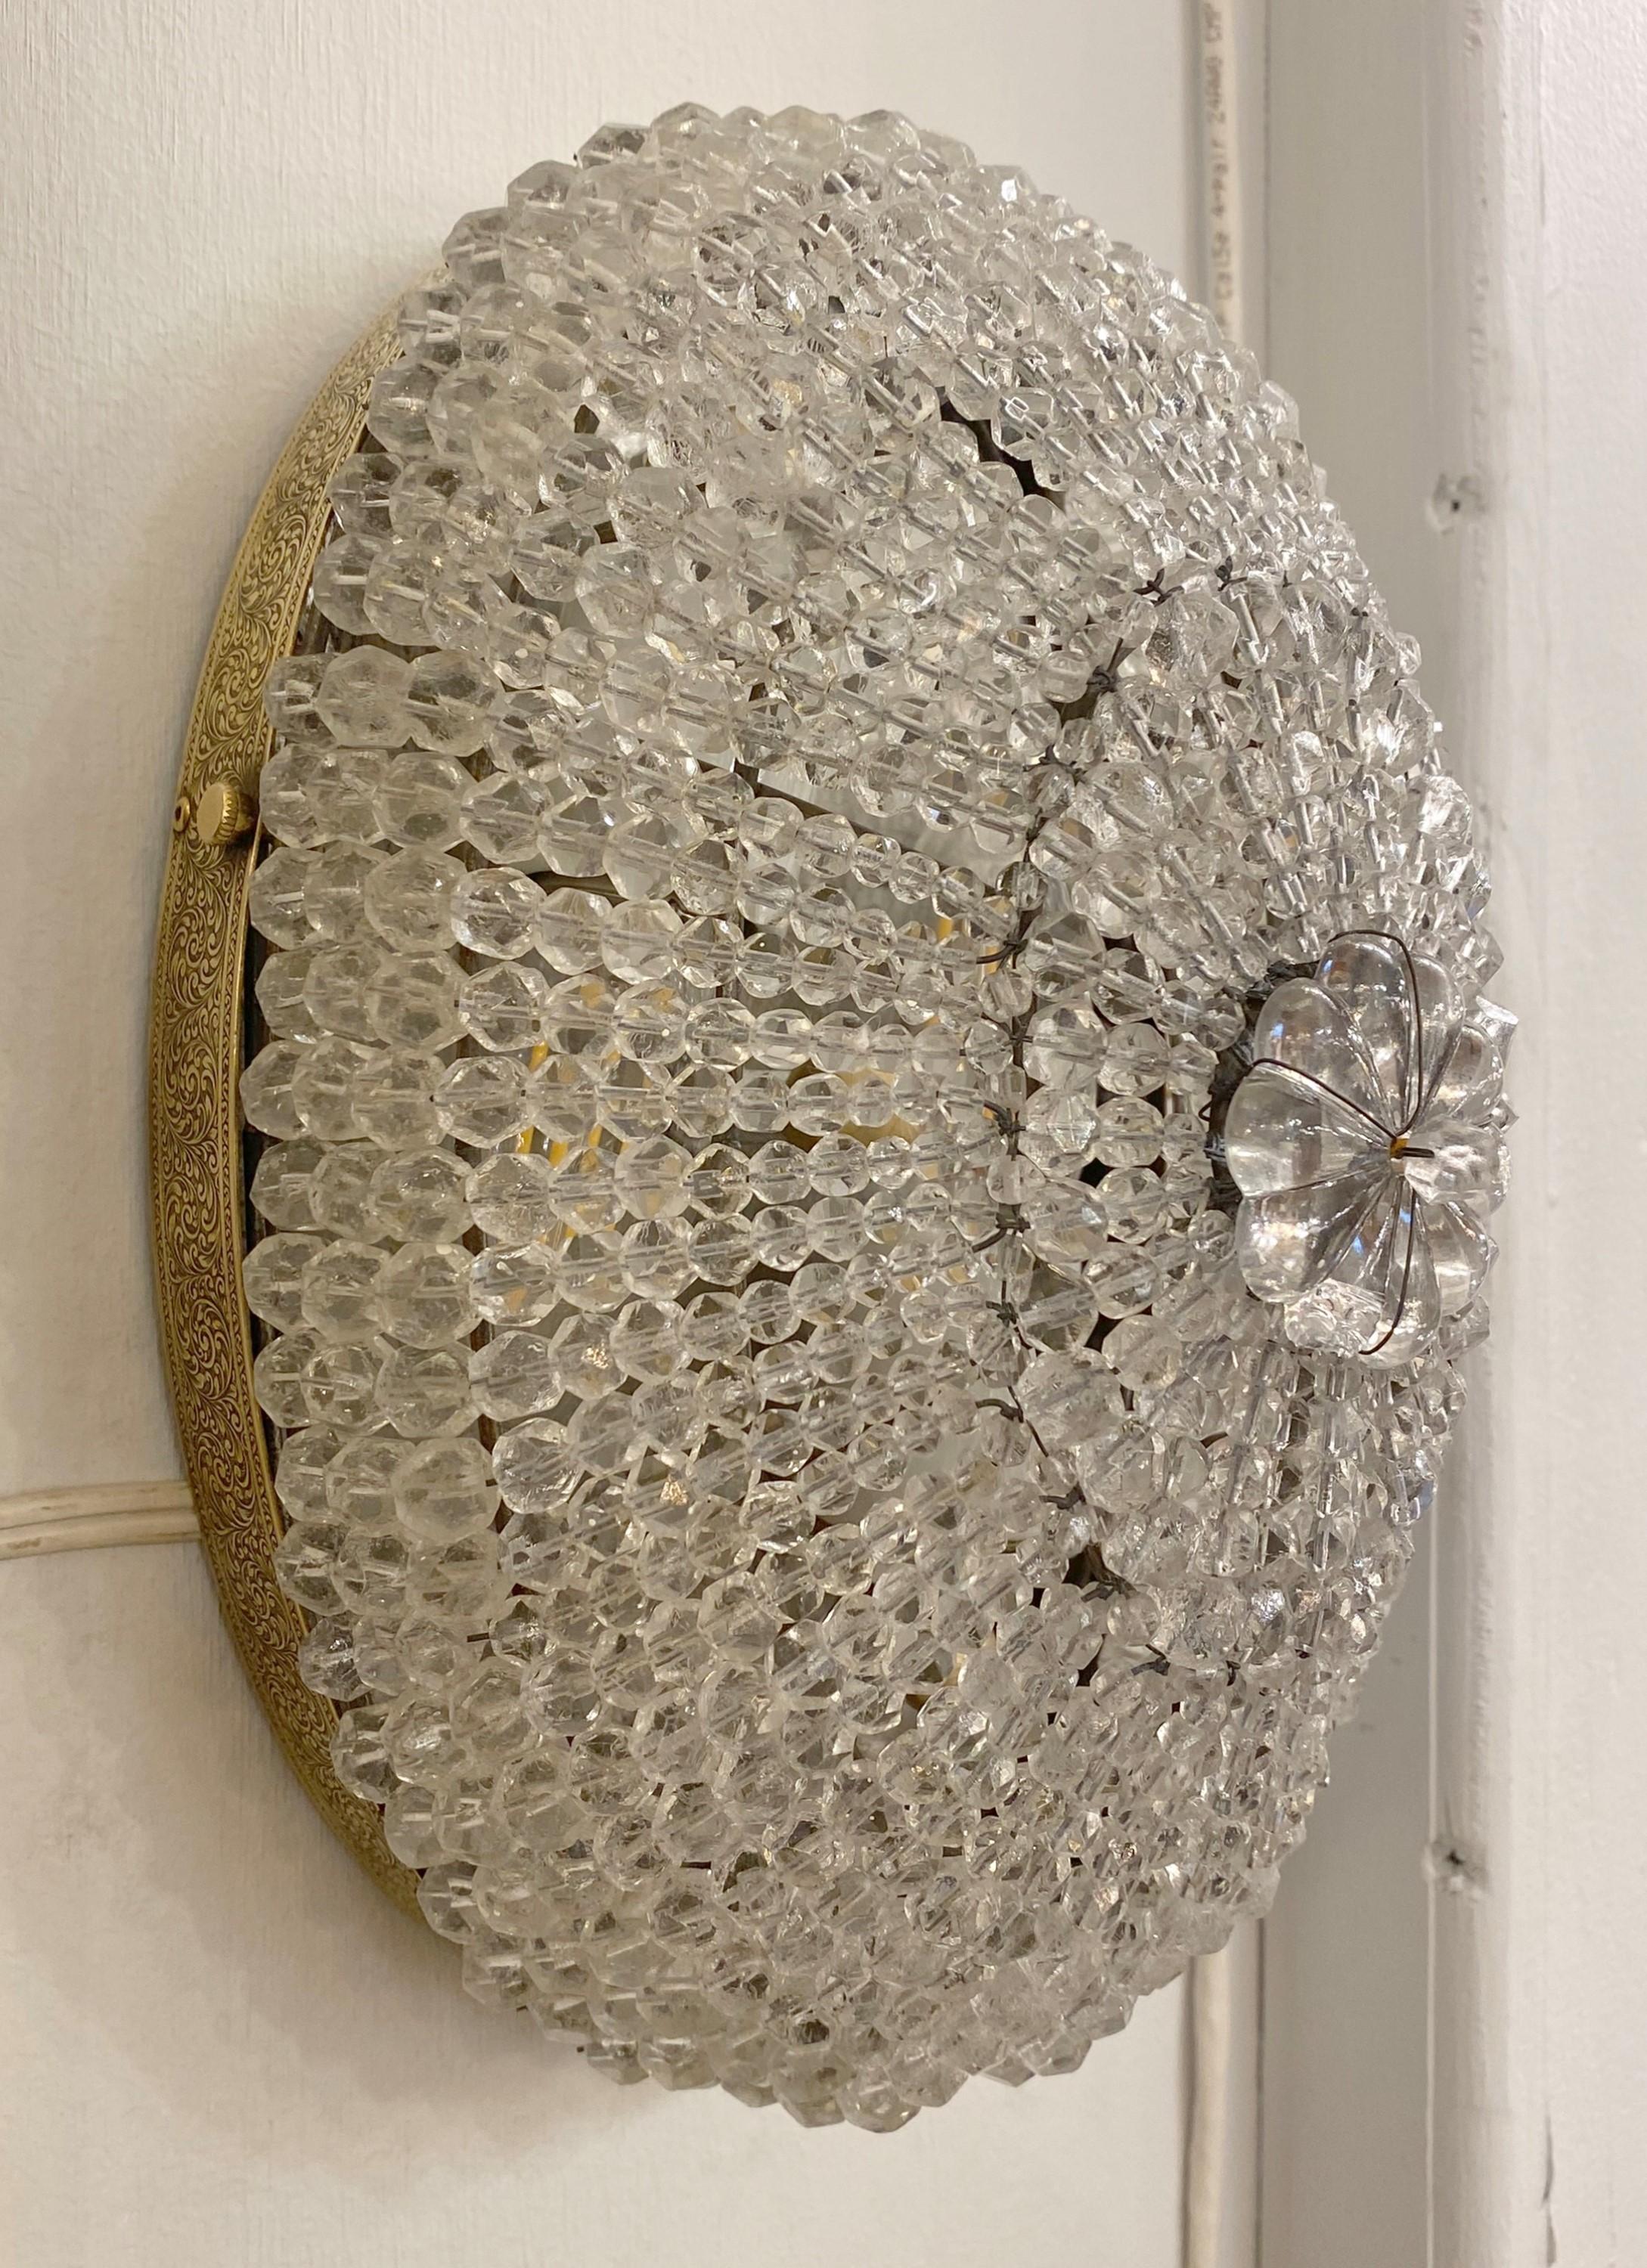 Early 20th Century oval wall sconce featuring clear beaded strands of crystals and an ornate brass flush mount frame with swirl details. This sconce also has a switch installed on it's side to be individually turned off and on. It can also be used